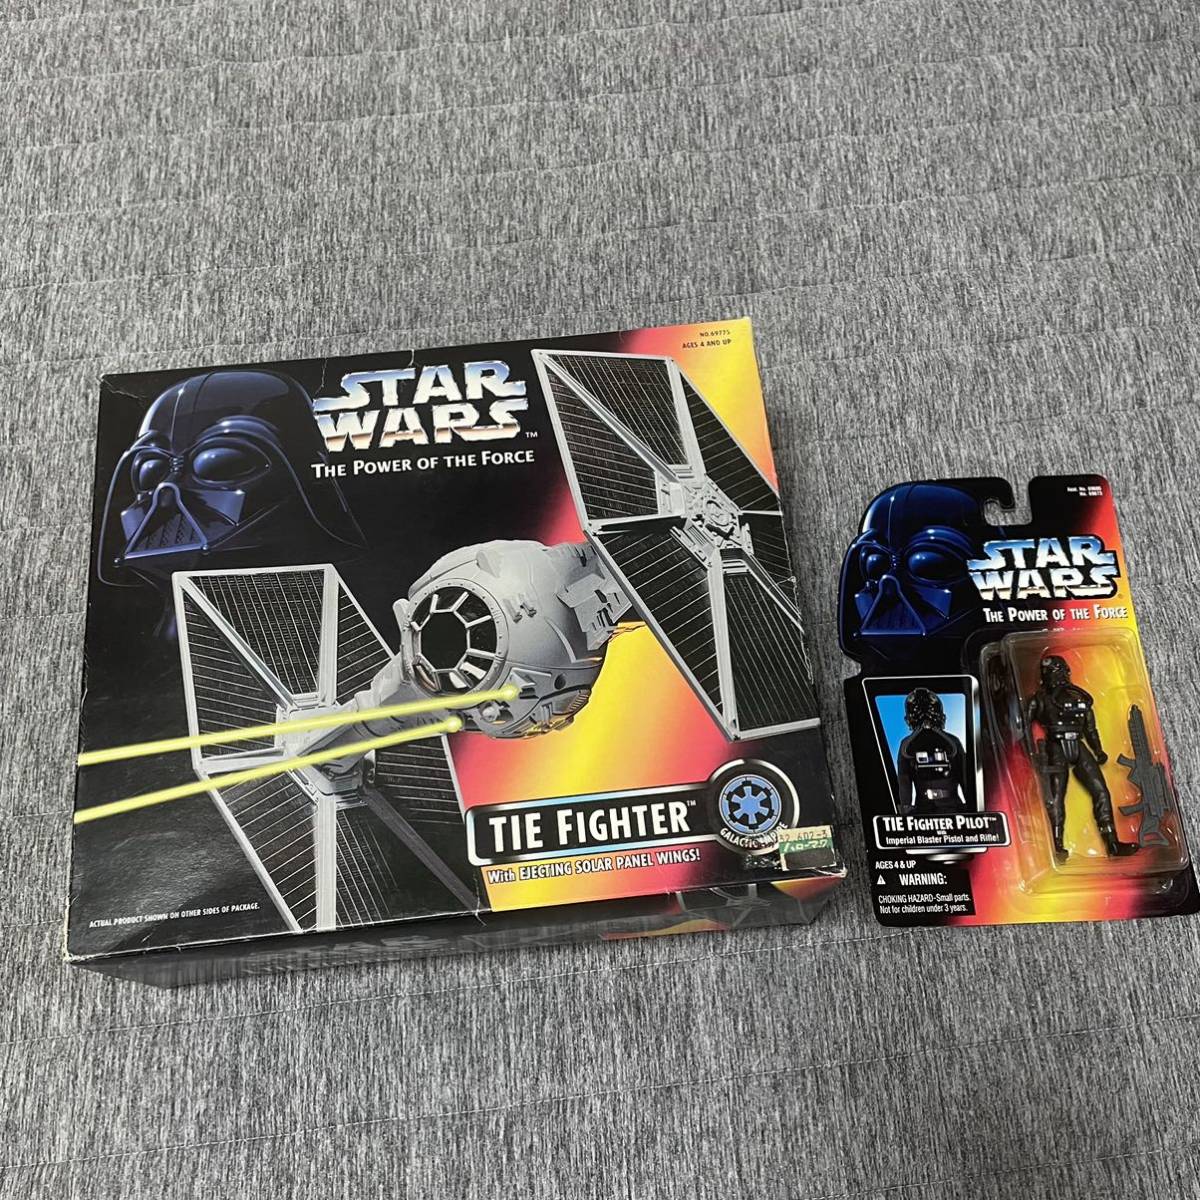 STAR WARS TIE FIGHTER with PILOT タイファイター パイロット 付